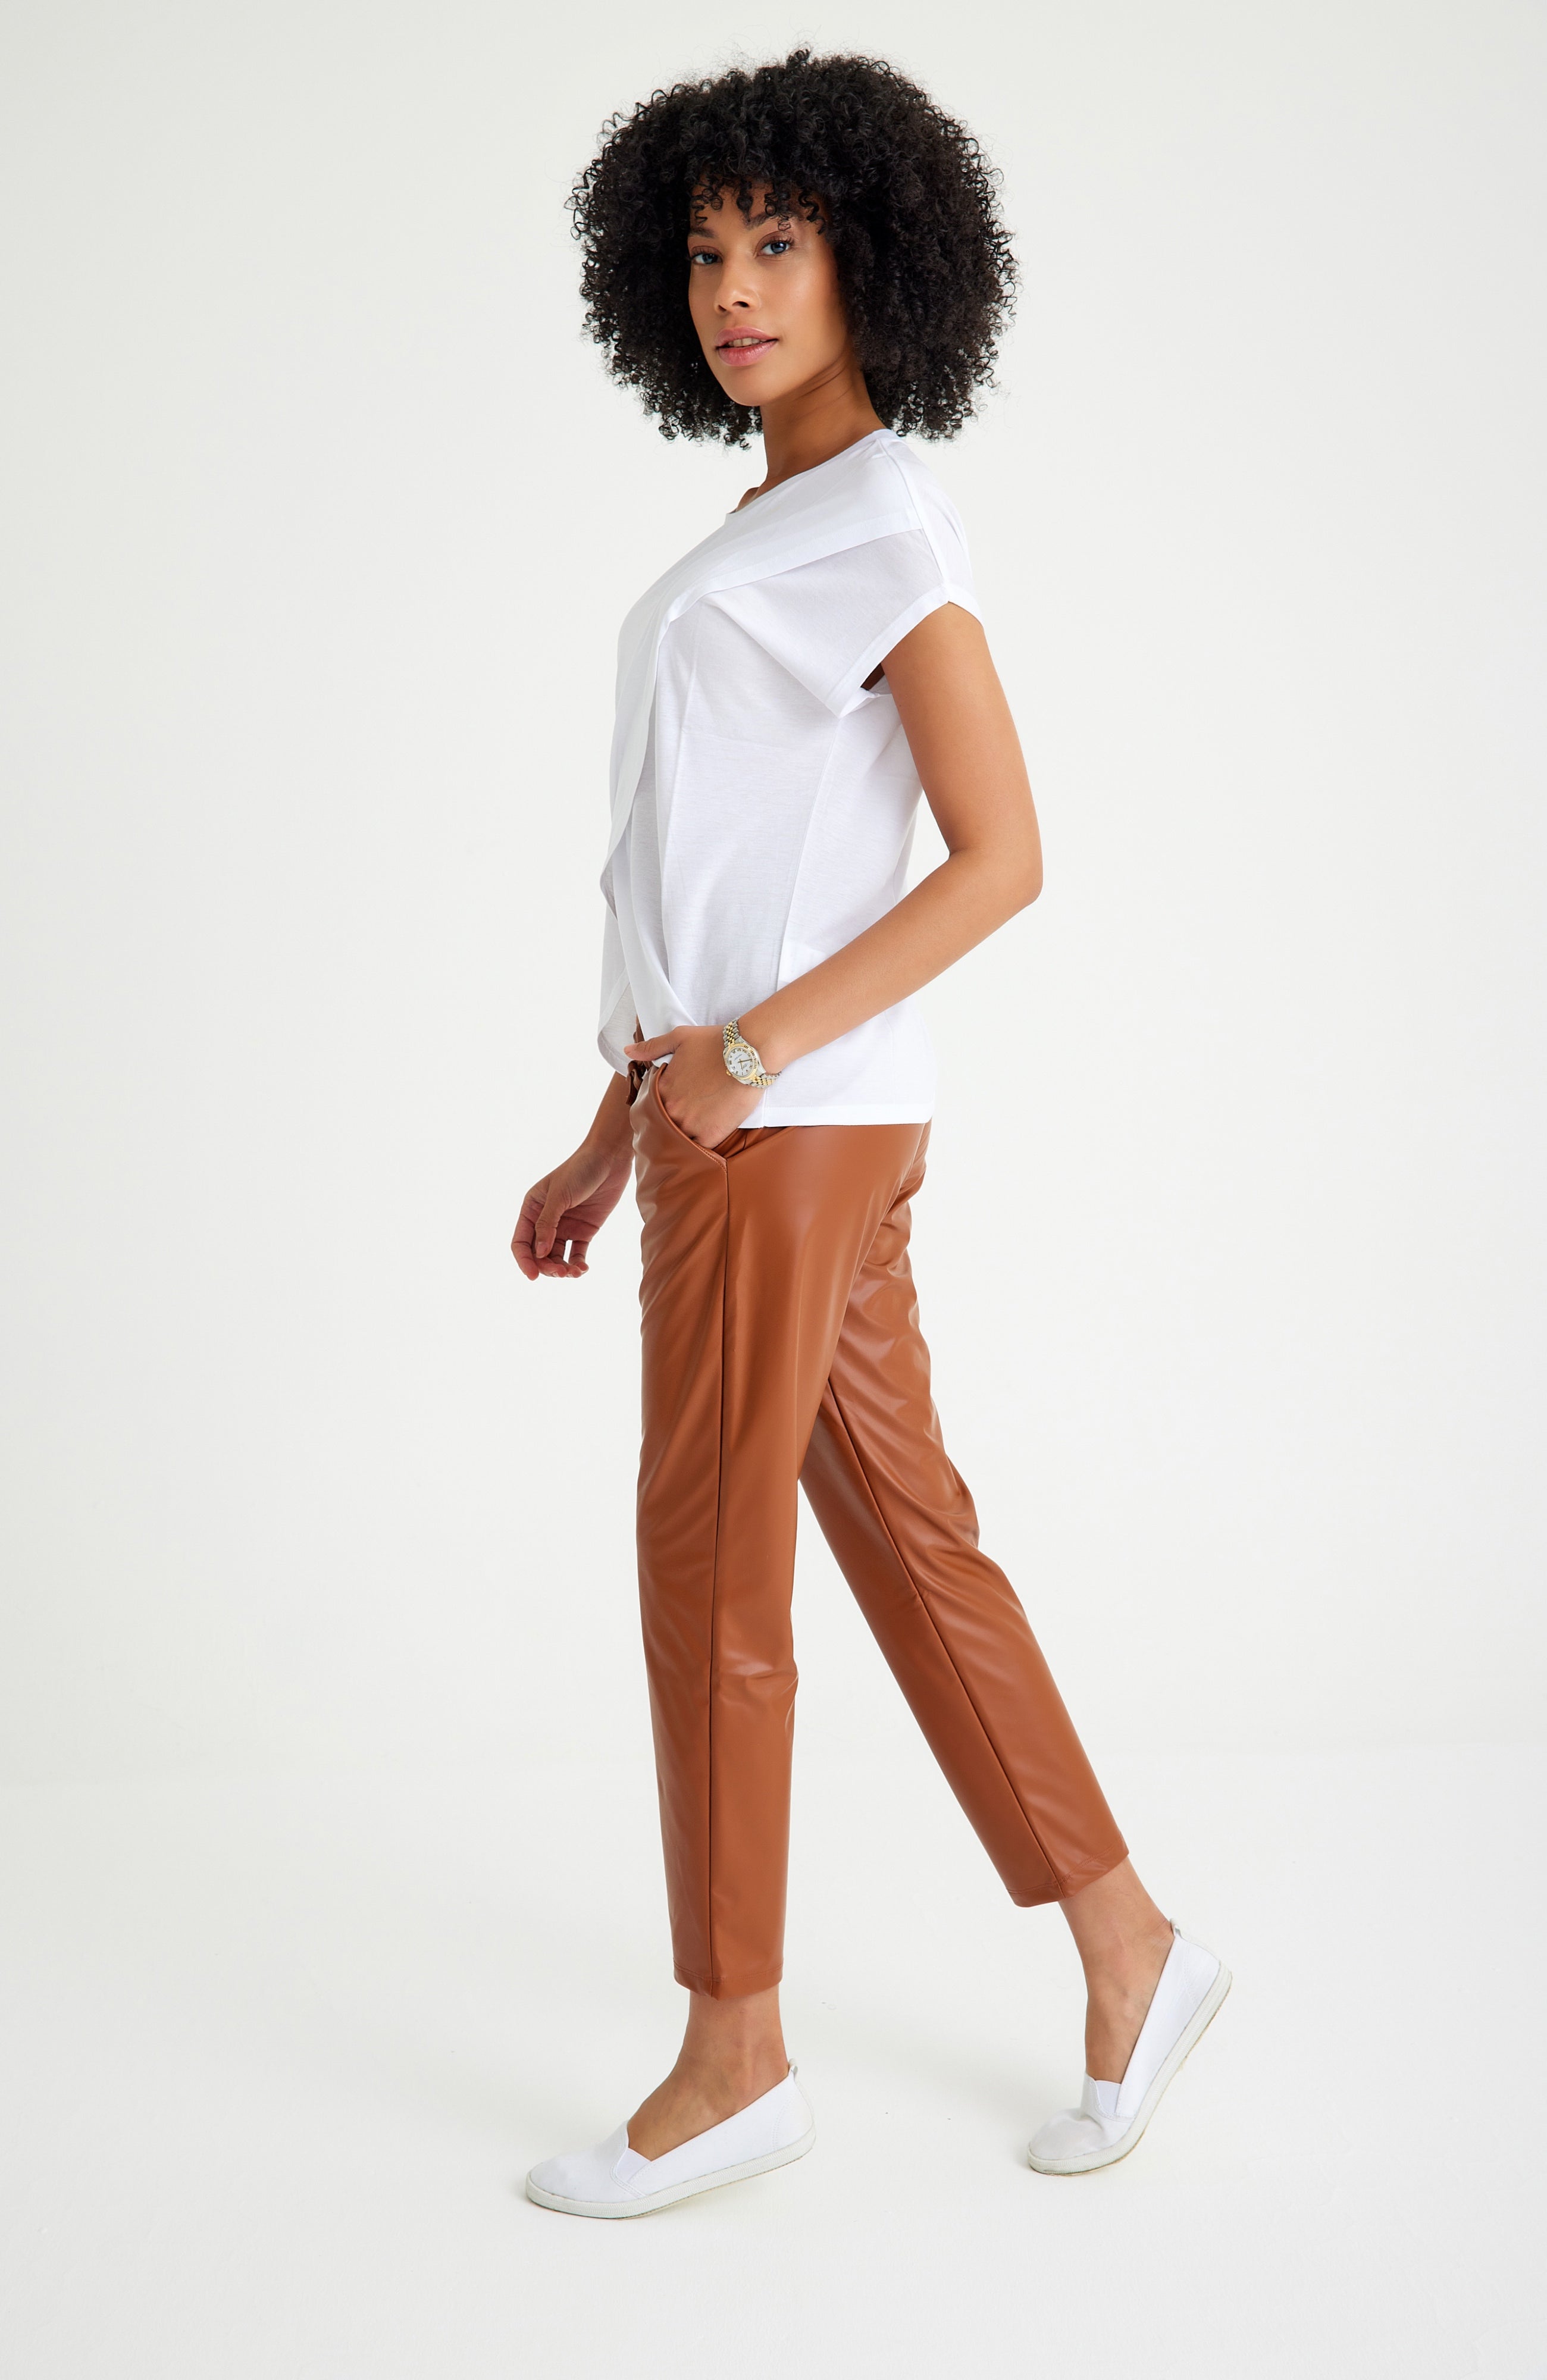 Comfy Cool Foldover Waistband Faux Leather Maternity Jogger Pants